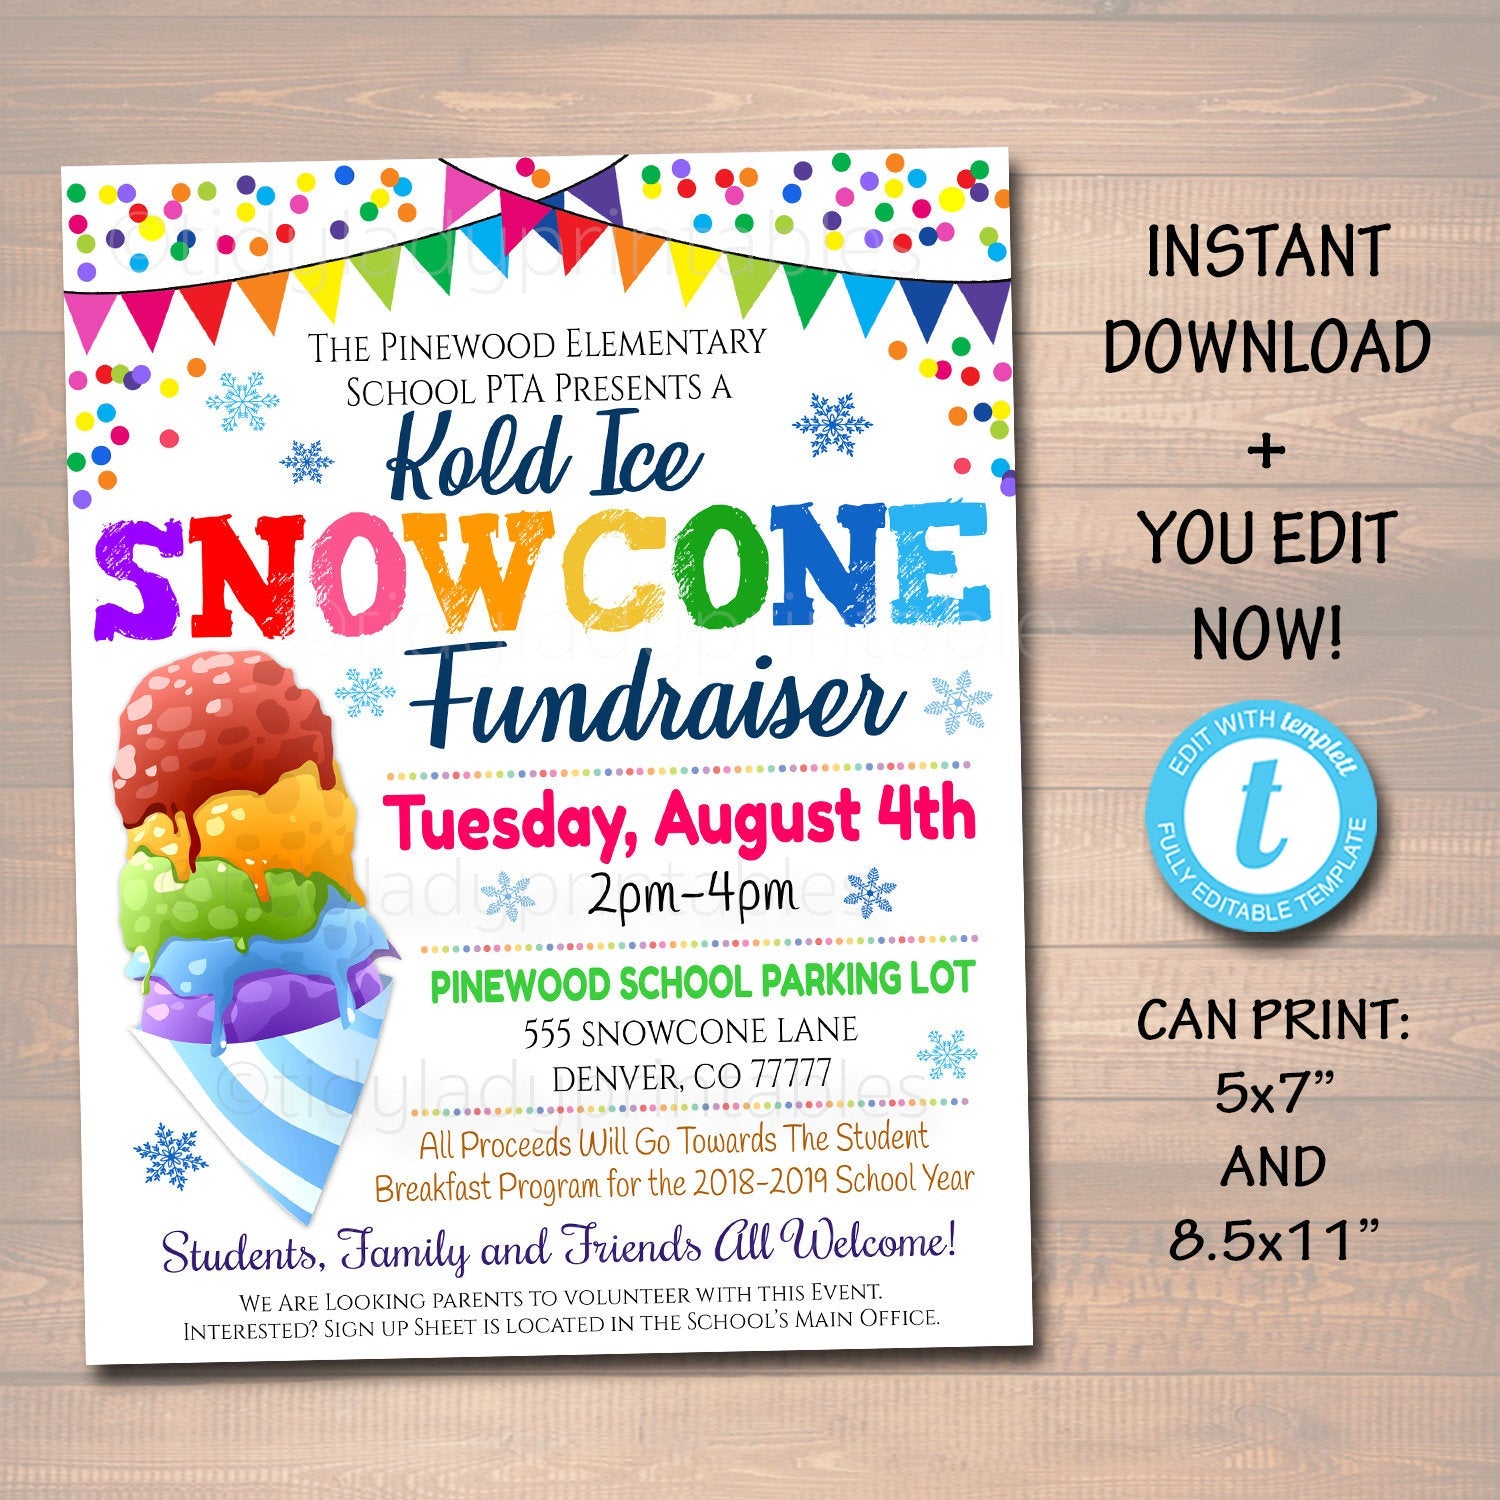 Snow Cone Fundraiser Event Flyer - Editable Template | TidyLady ...